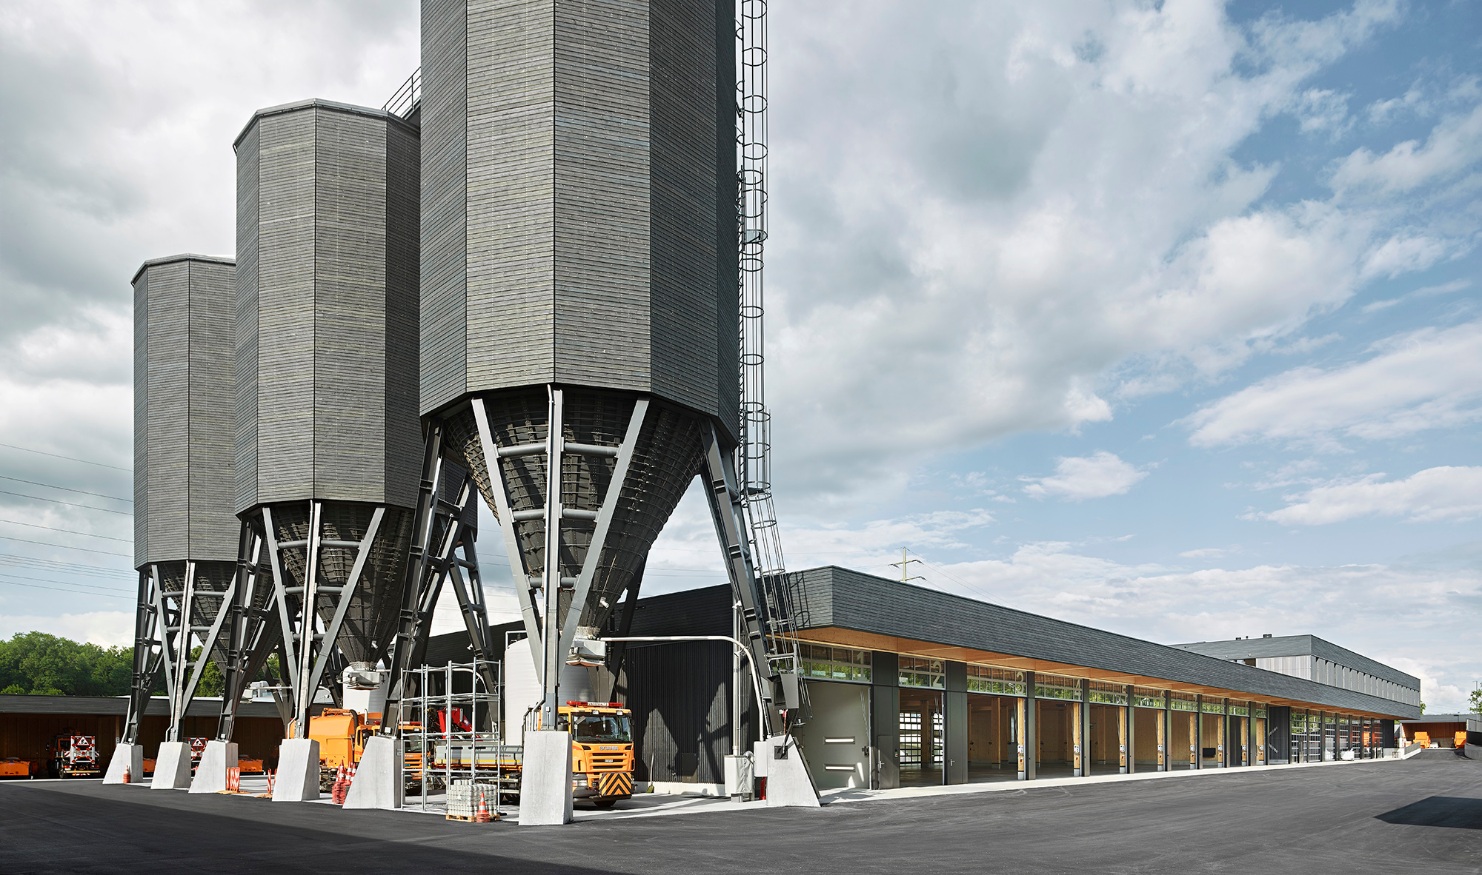 three dodecagonal timber silos with a volume of 900m3 each in Bern Wankdorf